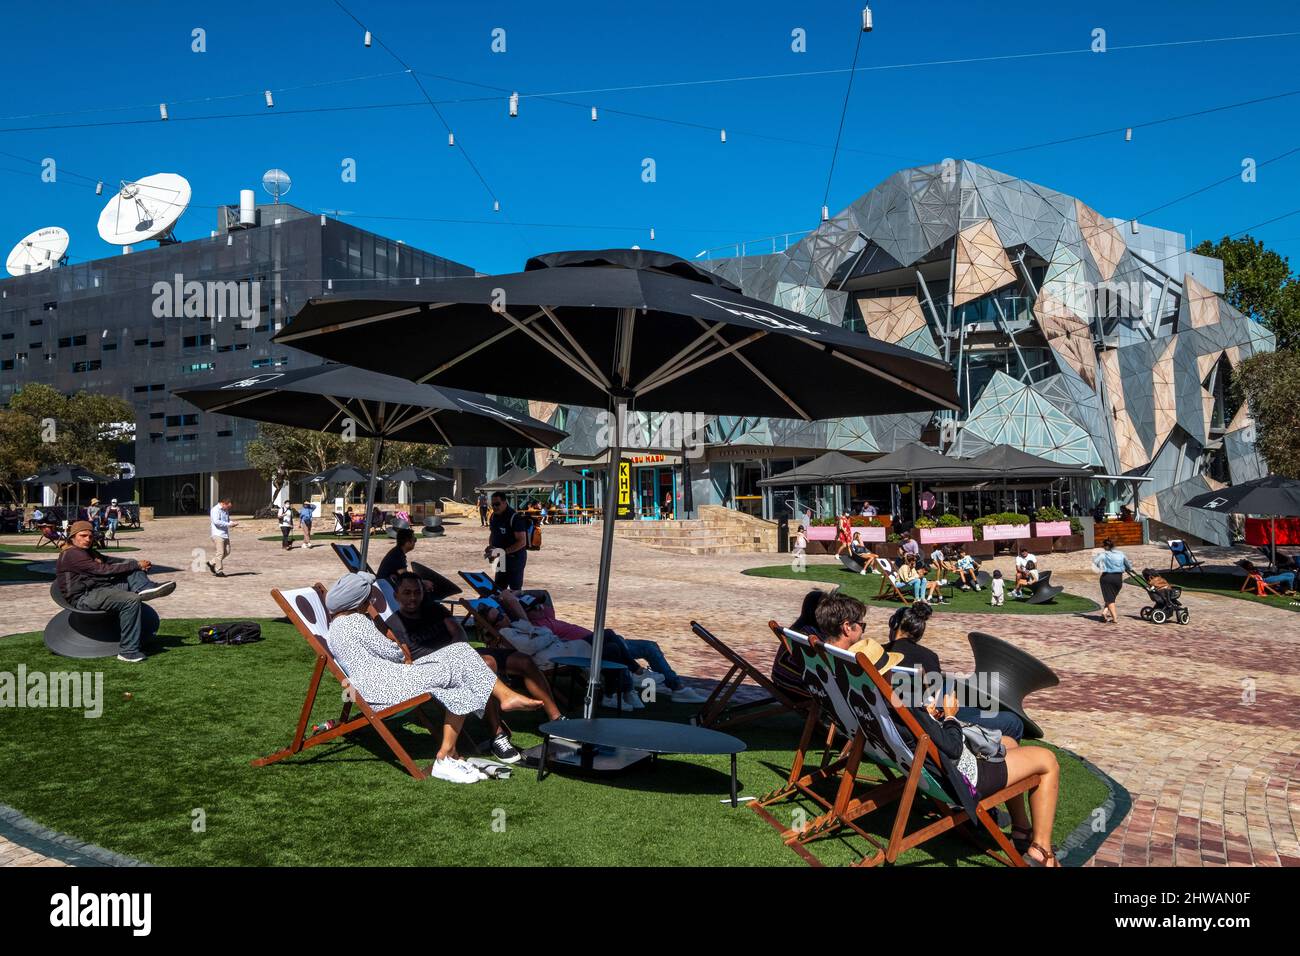 People relaxing in Federation Square. Melbourne, Victoria, Australia Stock Photo